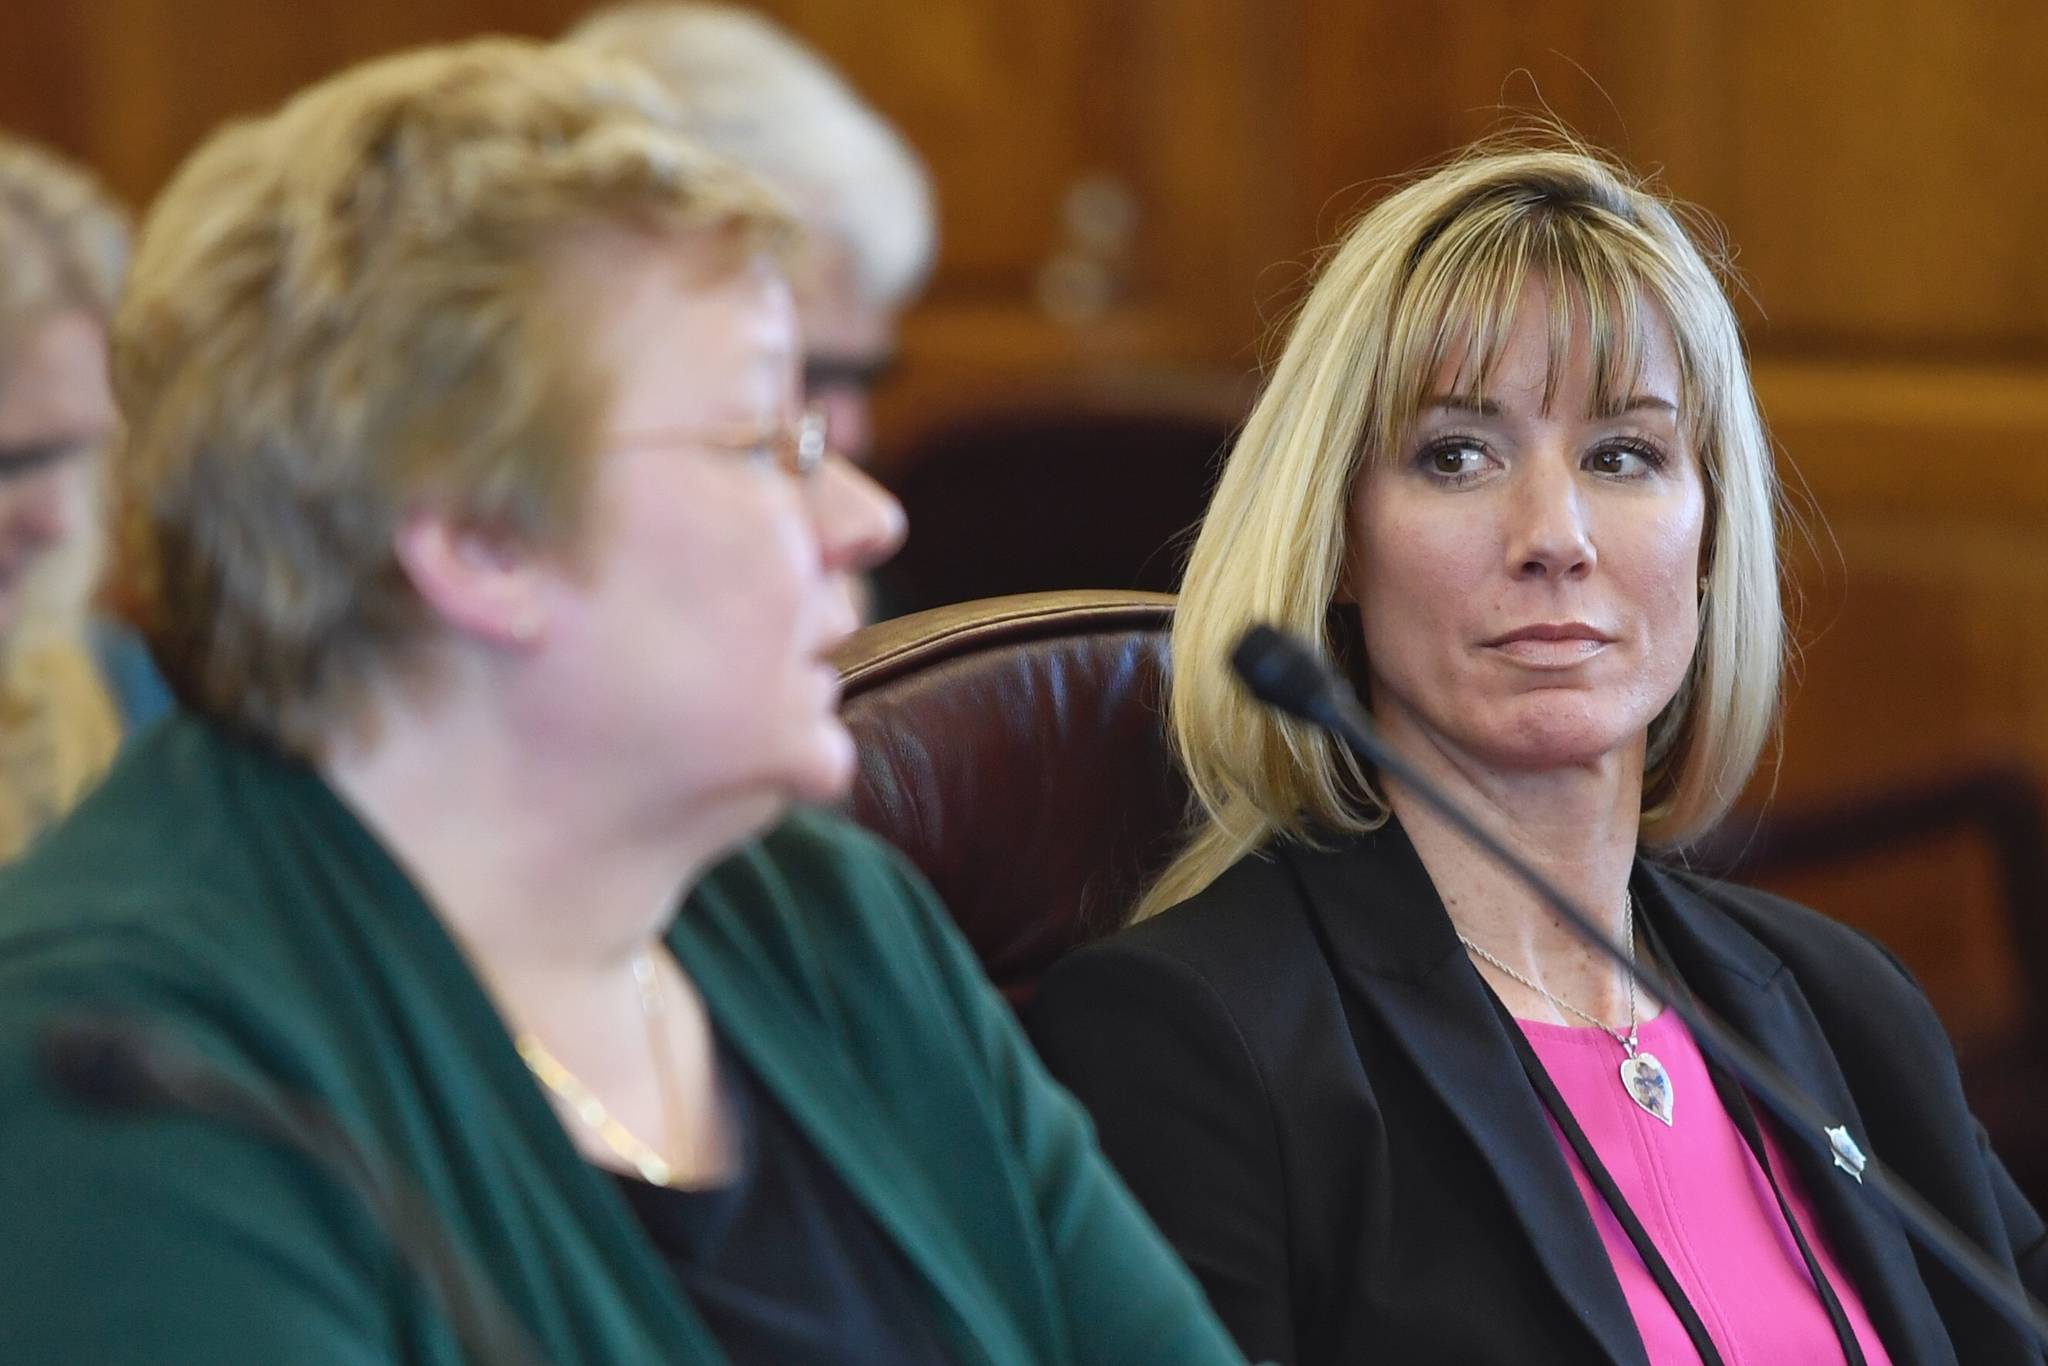 Amanda Price, commissioner of the Department of Public Safety, right, watches as Kathryn Monfreda, bureau chief of the Department of Public Safety’s Division of Statewide Services, presents the Uniform Crime Reporting Annual Report to House members during an informational meeting at the Capitol on Tuesday, Feb. 5, 2019. (Michael Penn | Juneau Empire File)